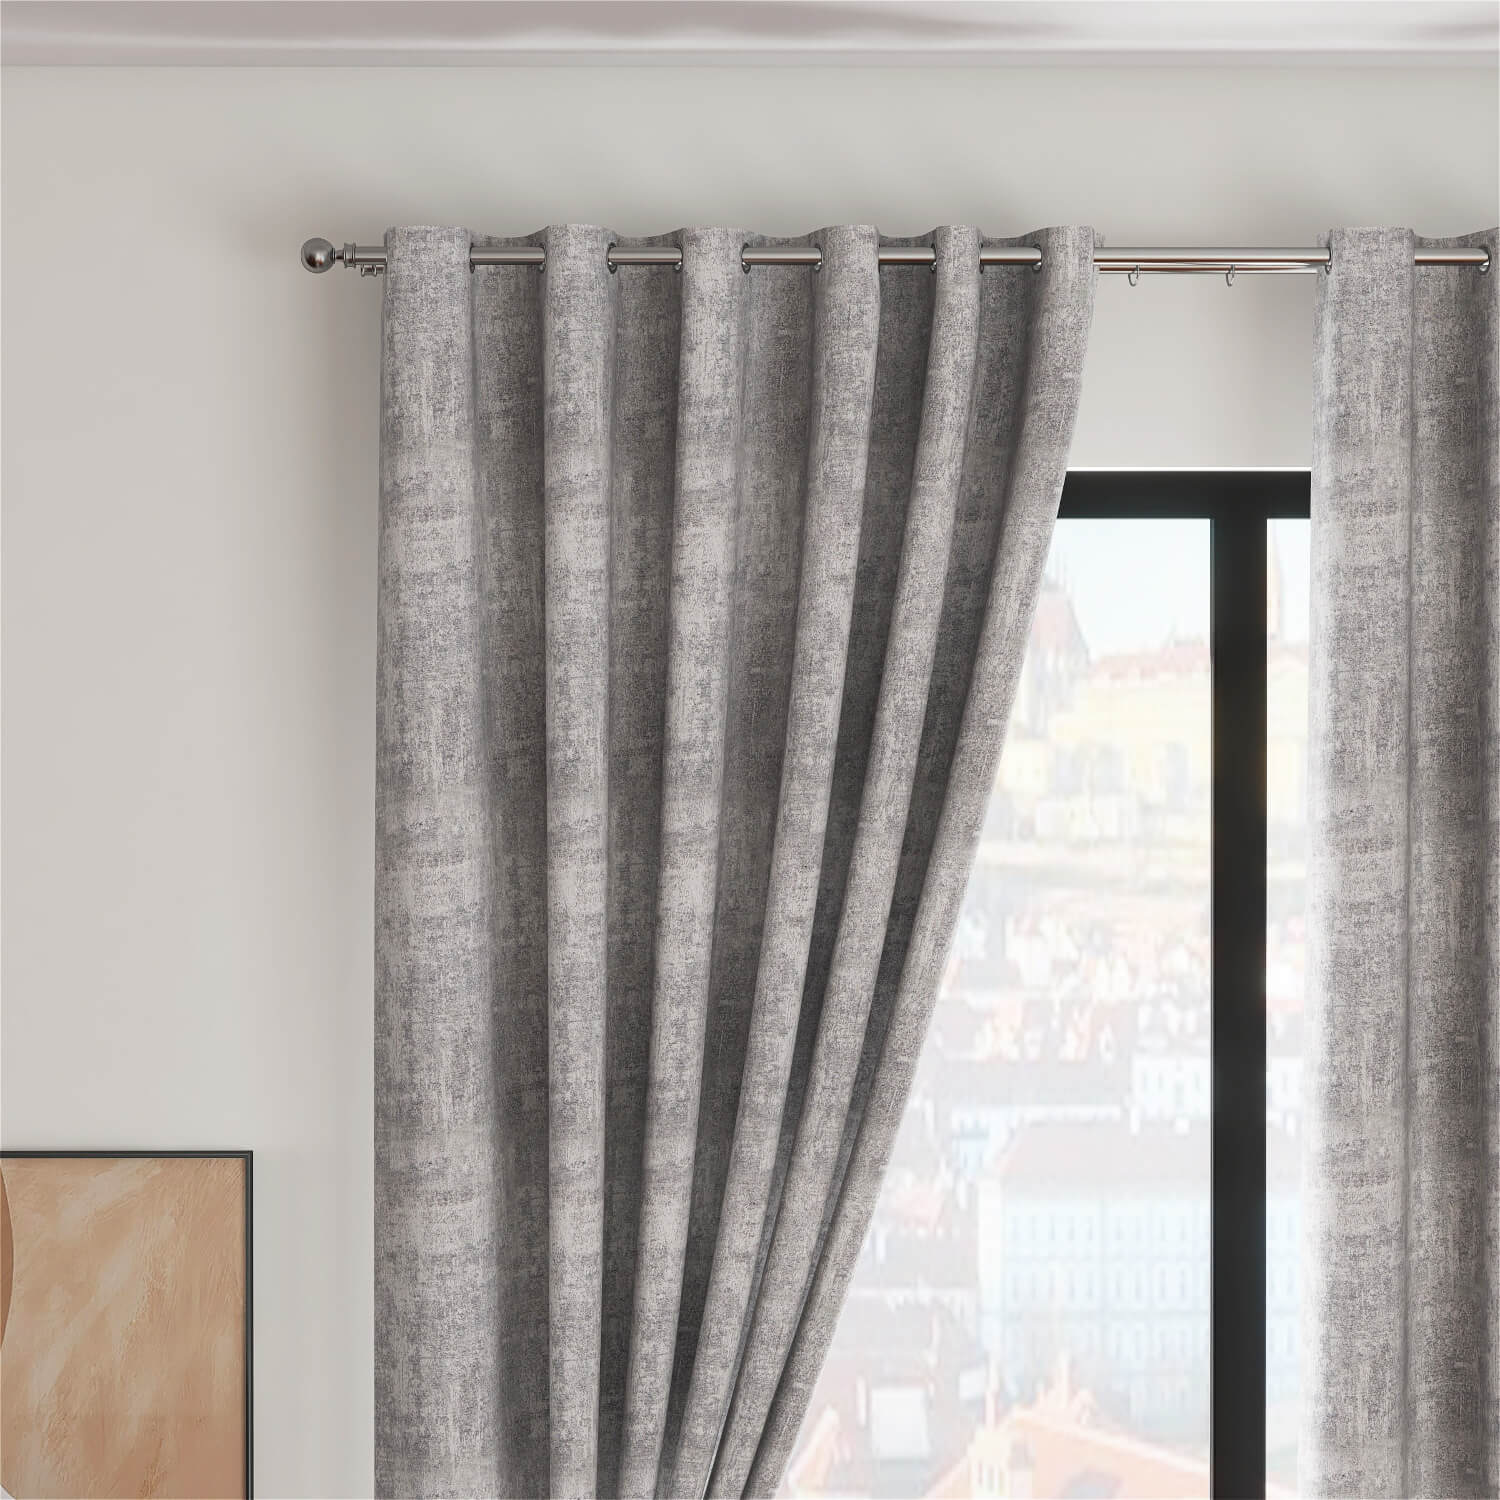 The Home Living Room Fiesta Ring Top Curtains - Silver 2 Shaws Department Stores